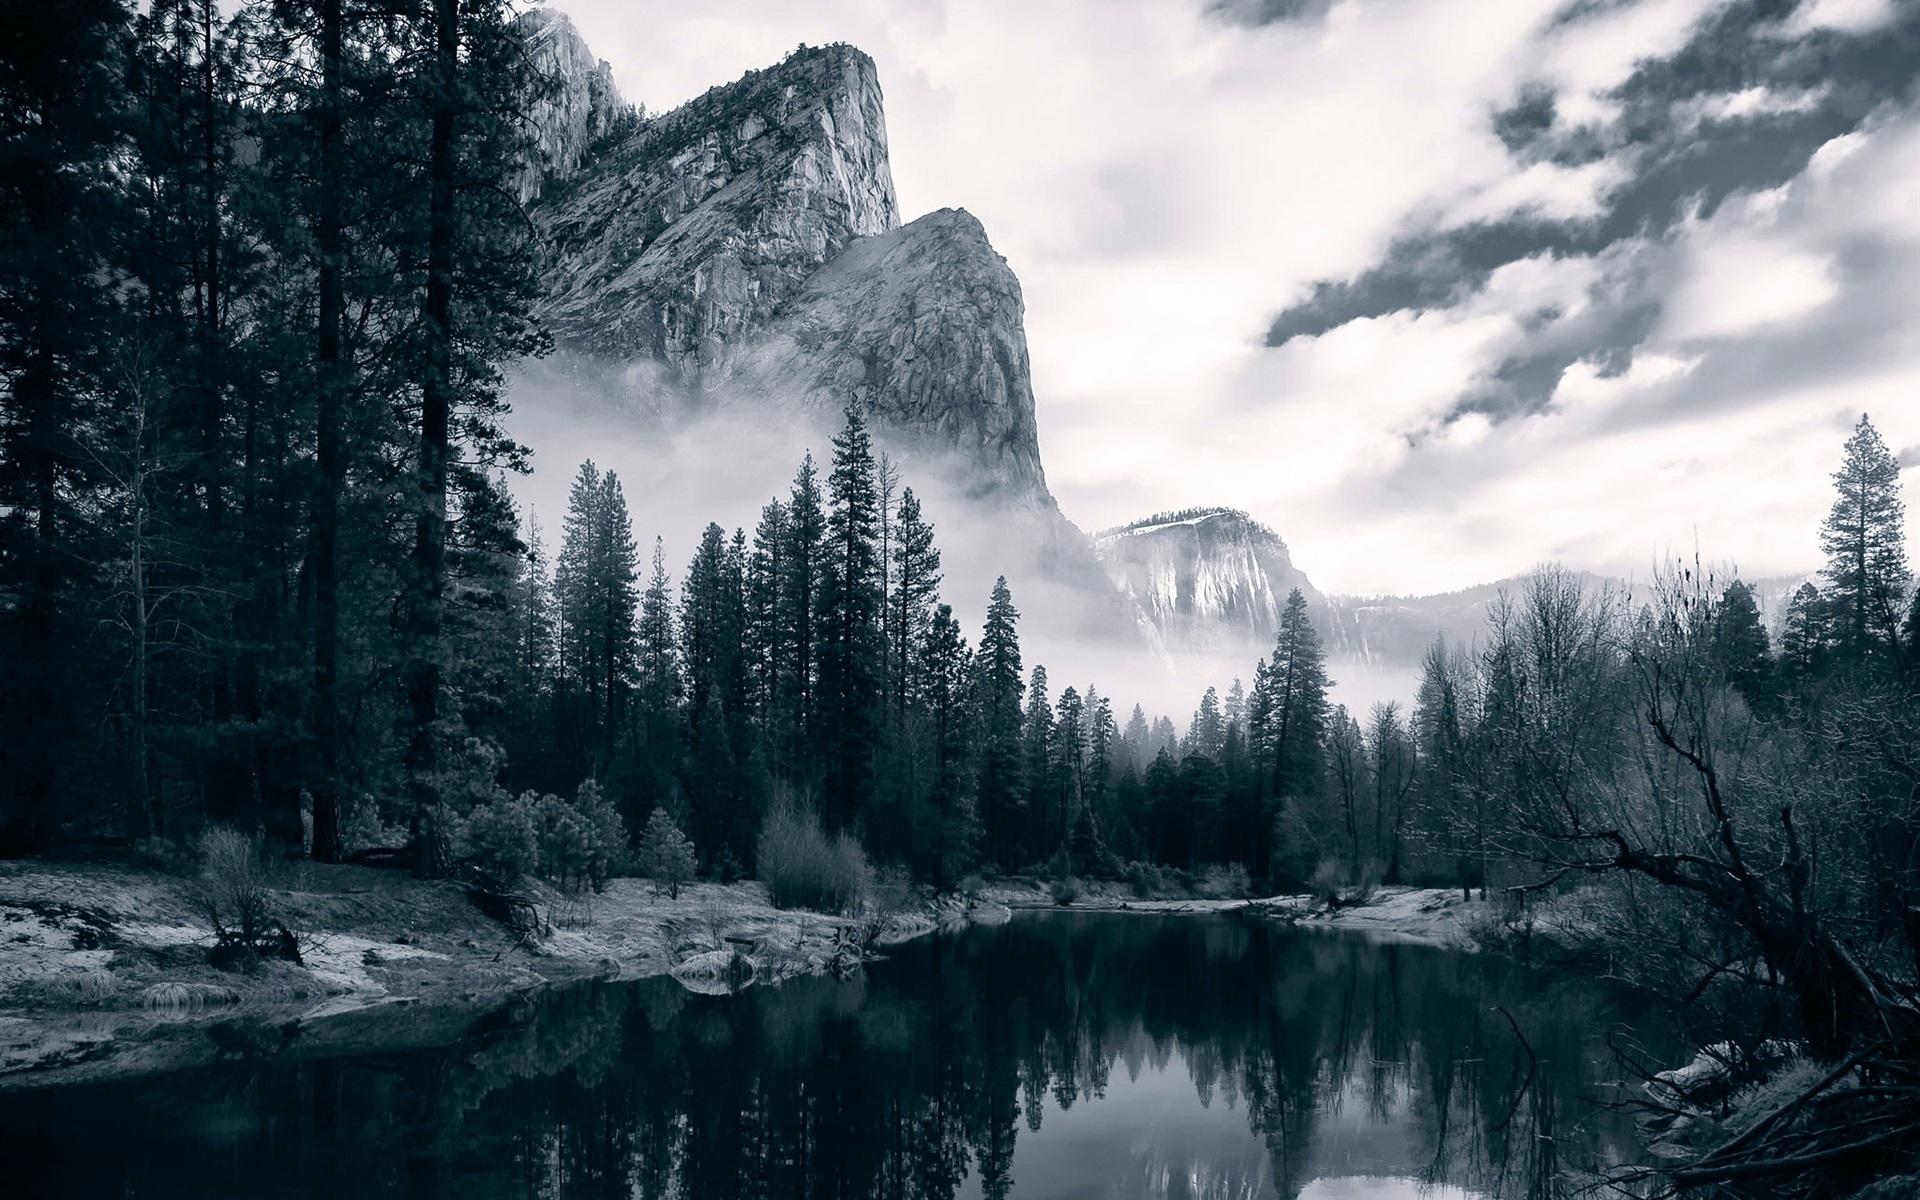 Merced River Yosemite Valley Wallpapers Wallpaper Cave